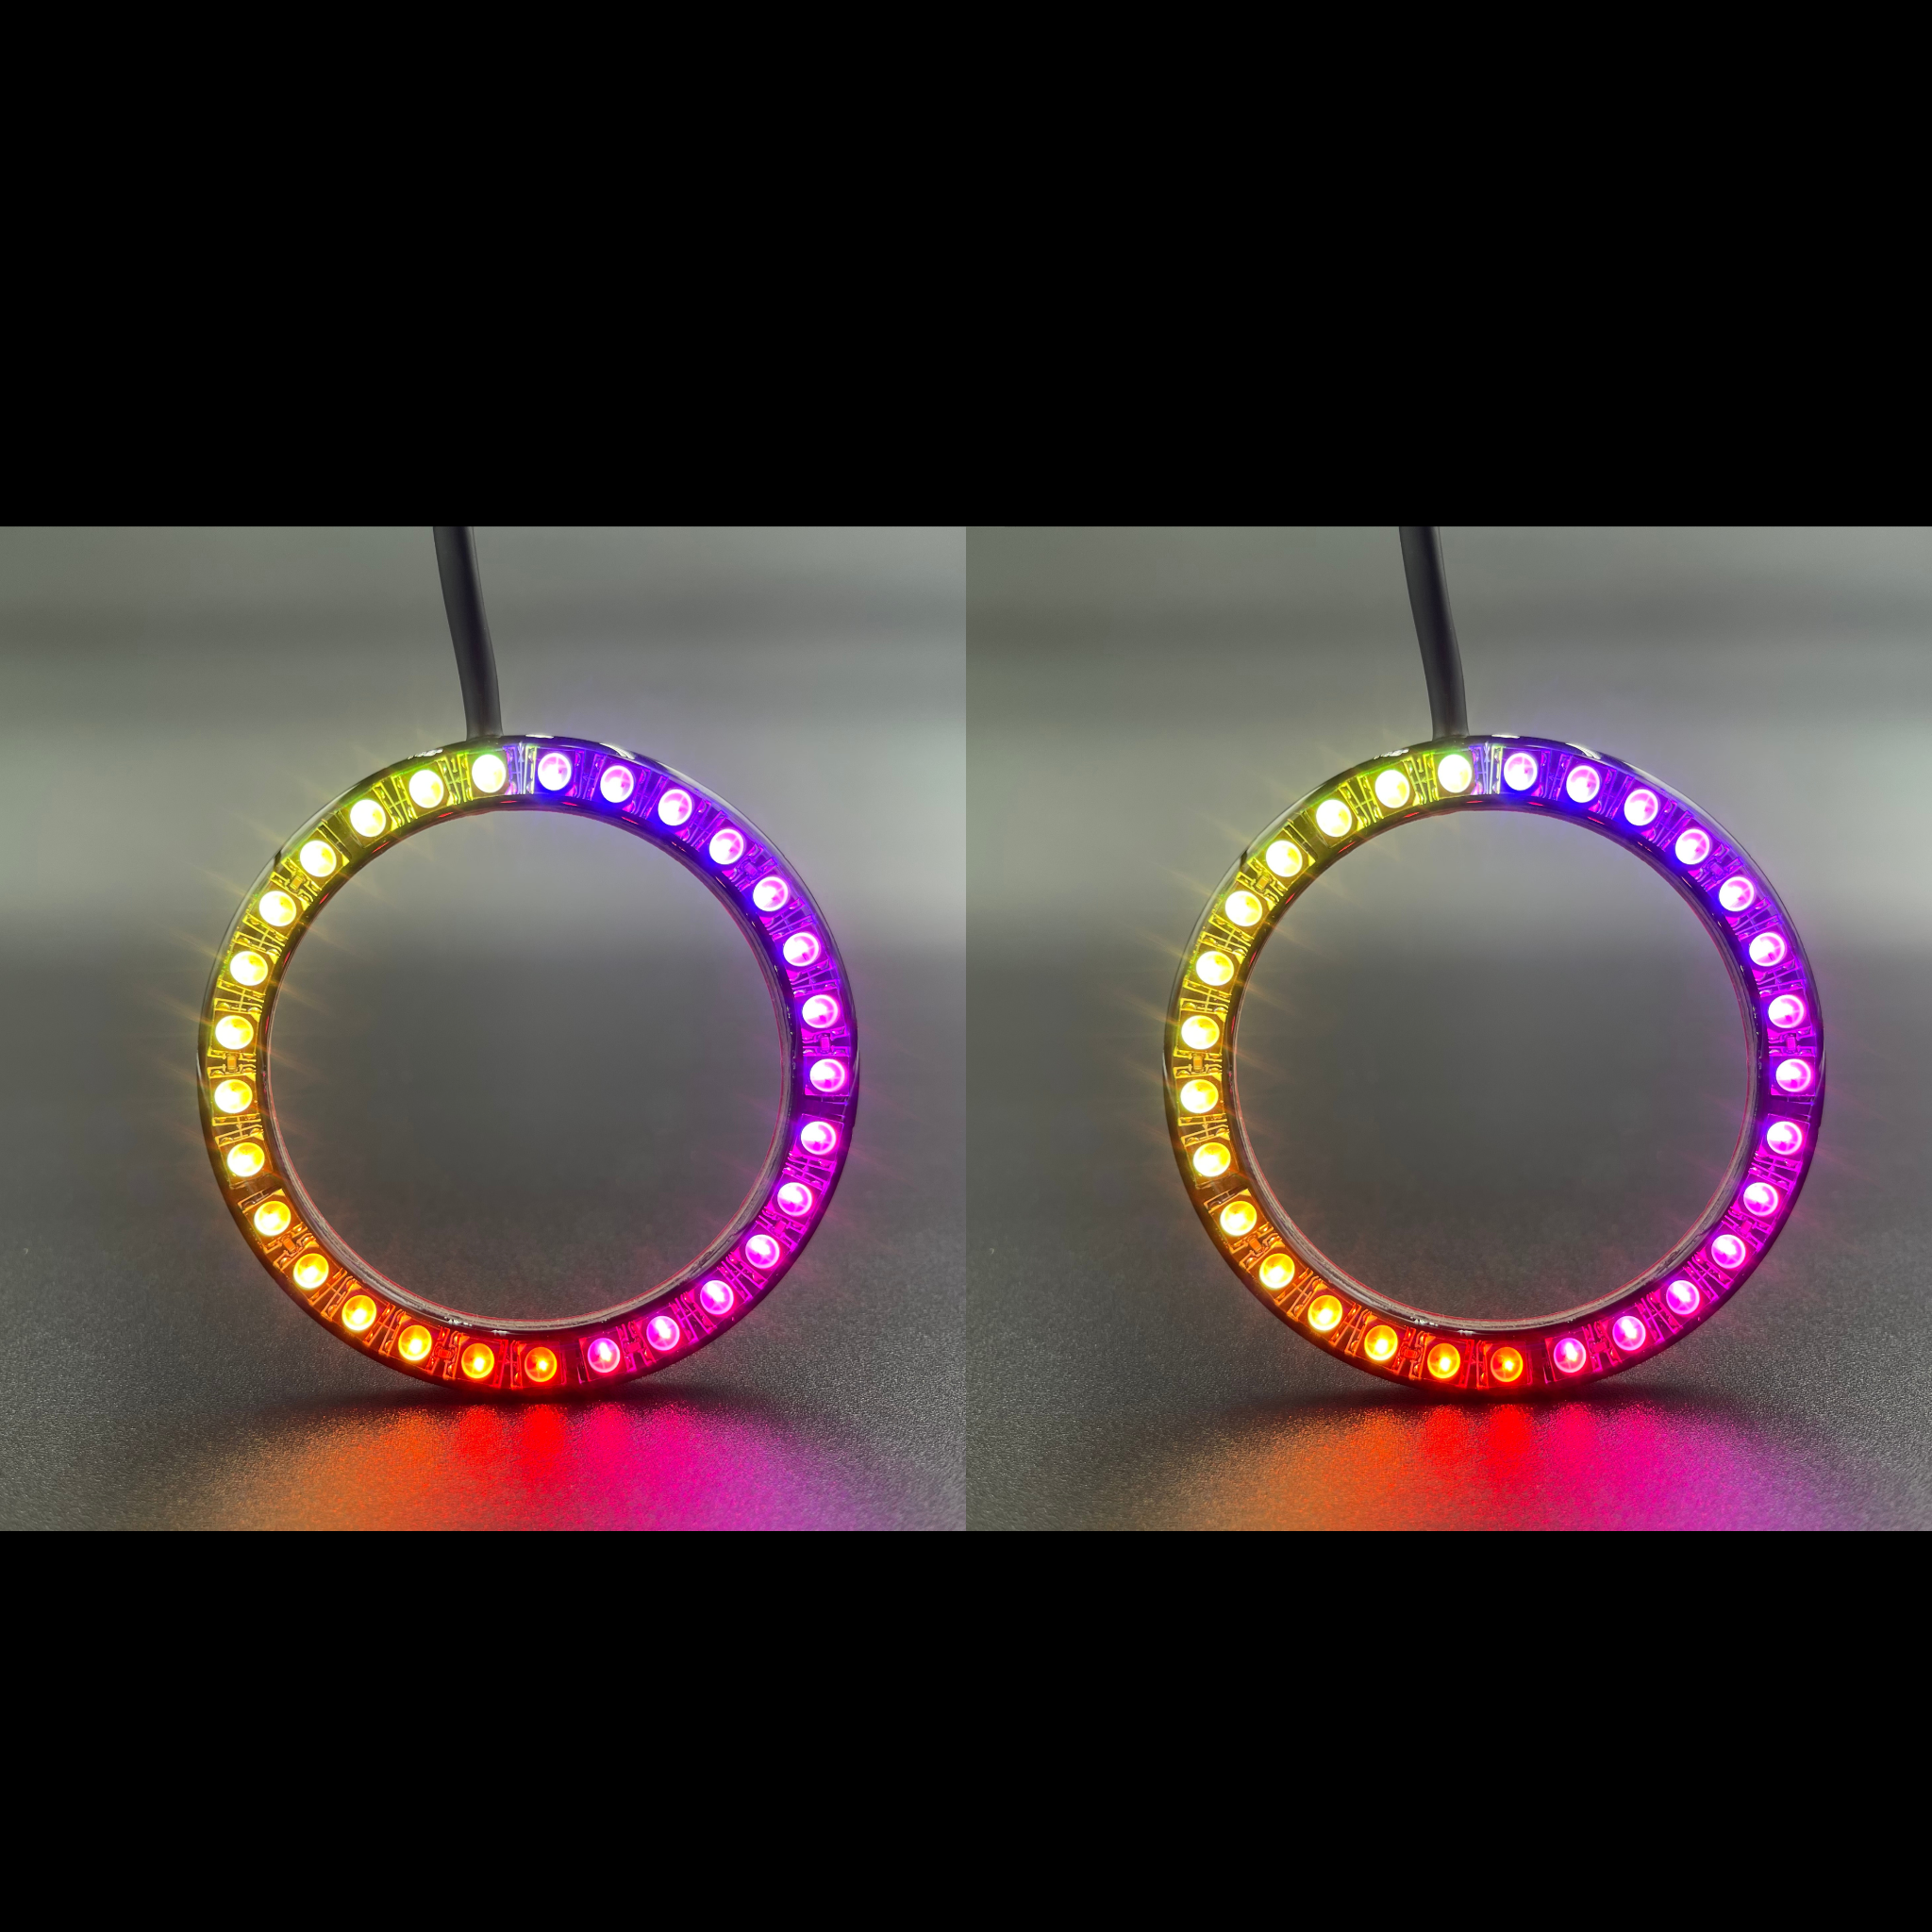 1992-1996 Ford F150 Multicolor Halo Kit - RGB Halo Kits Multicolor Flow Series Color Chasing RGBWA LED headlight kit Oracle Lighting Trendz OneUpLighting Morimoto theretrofitsource AutoLEDTech Diode Dynamics